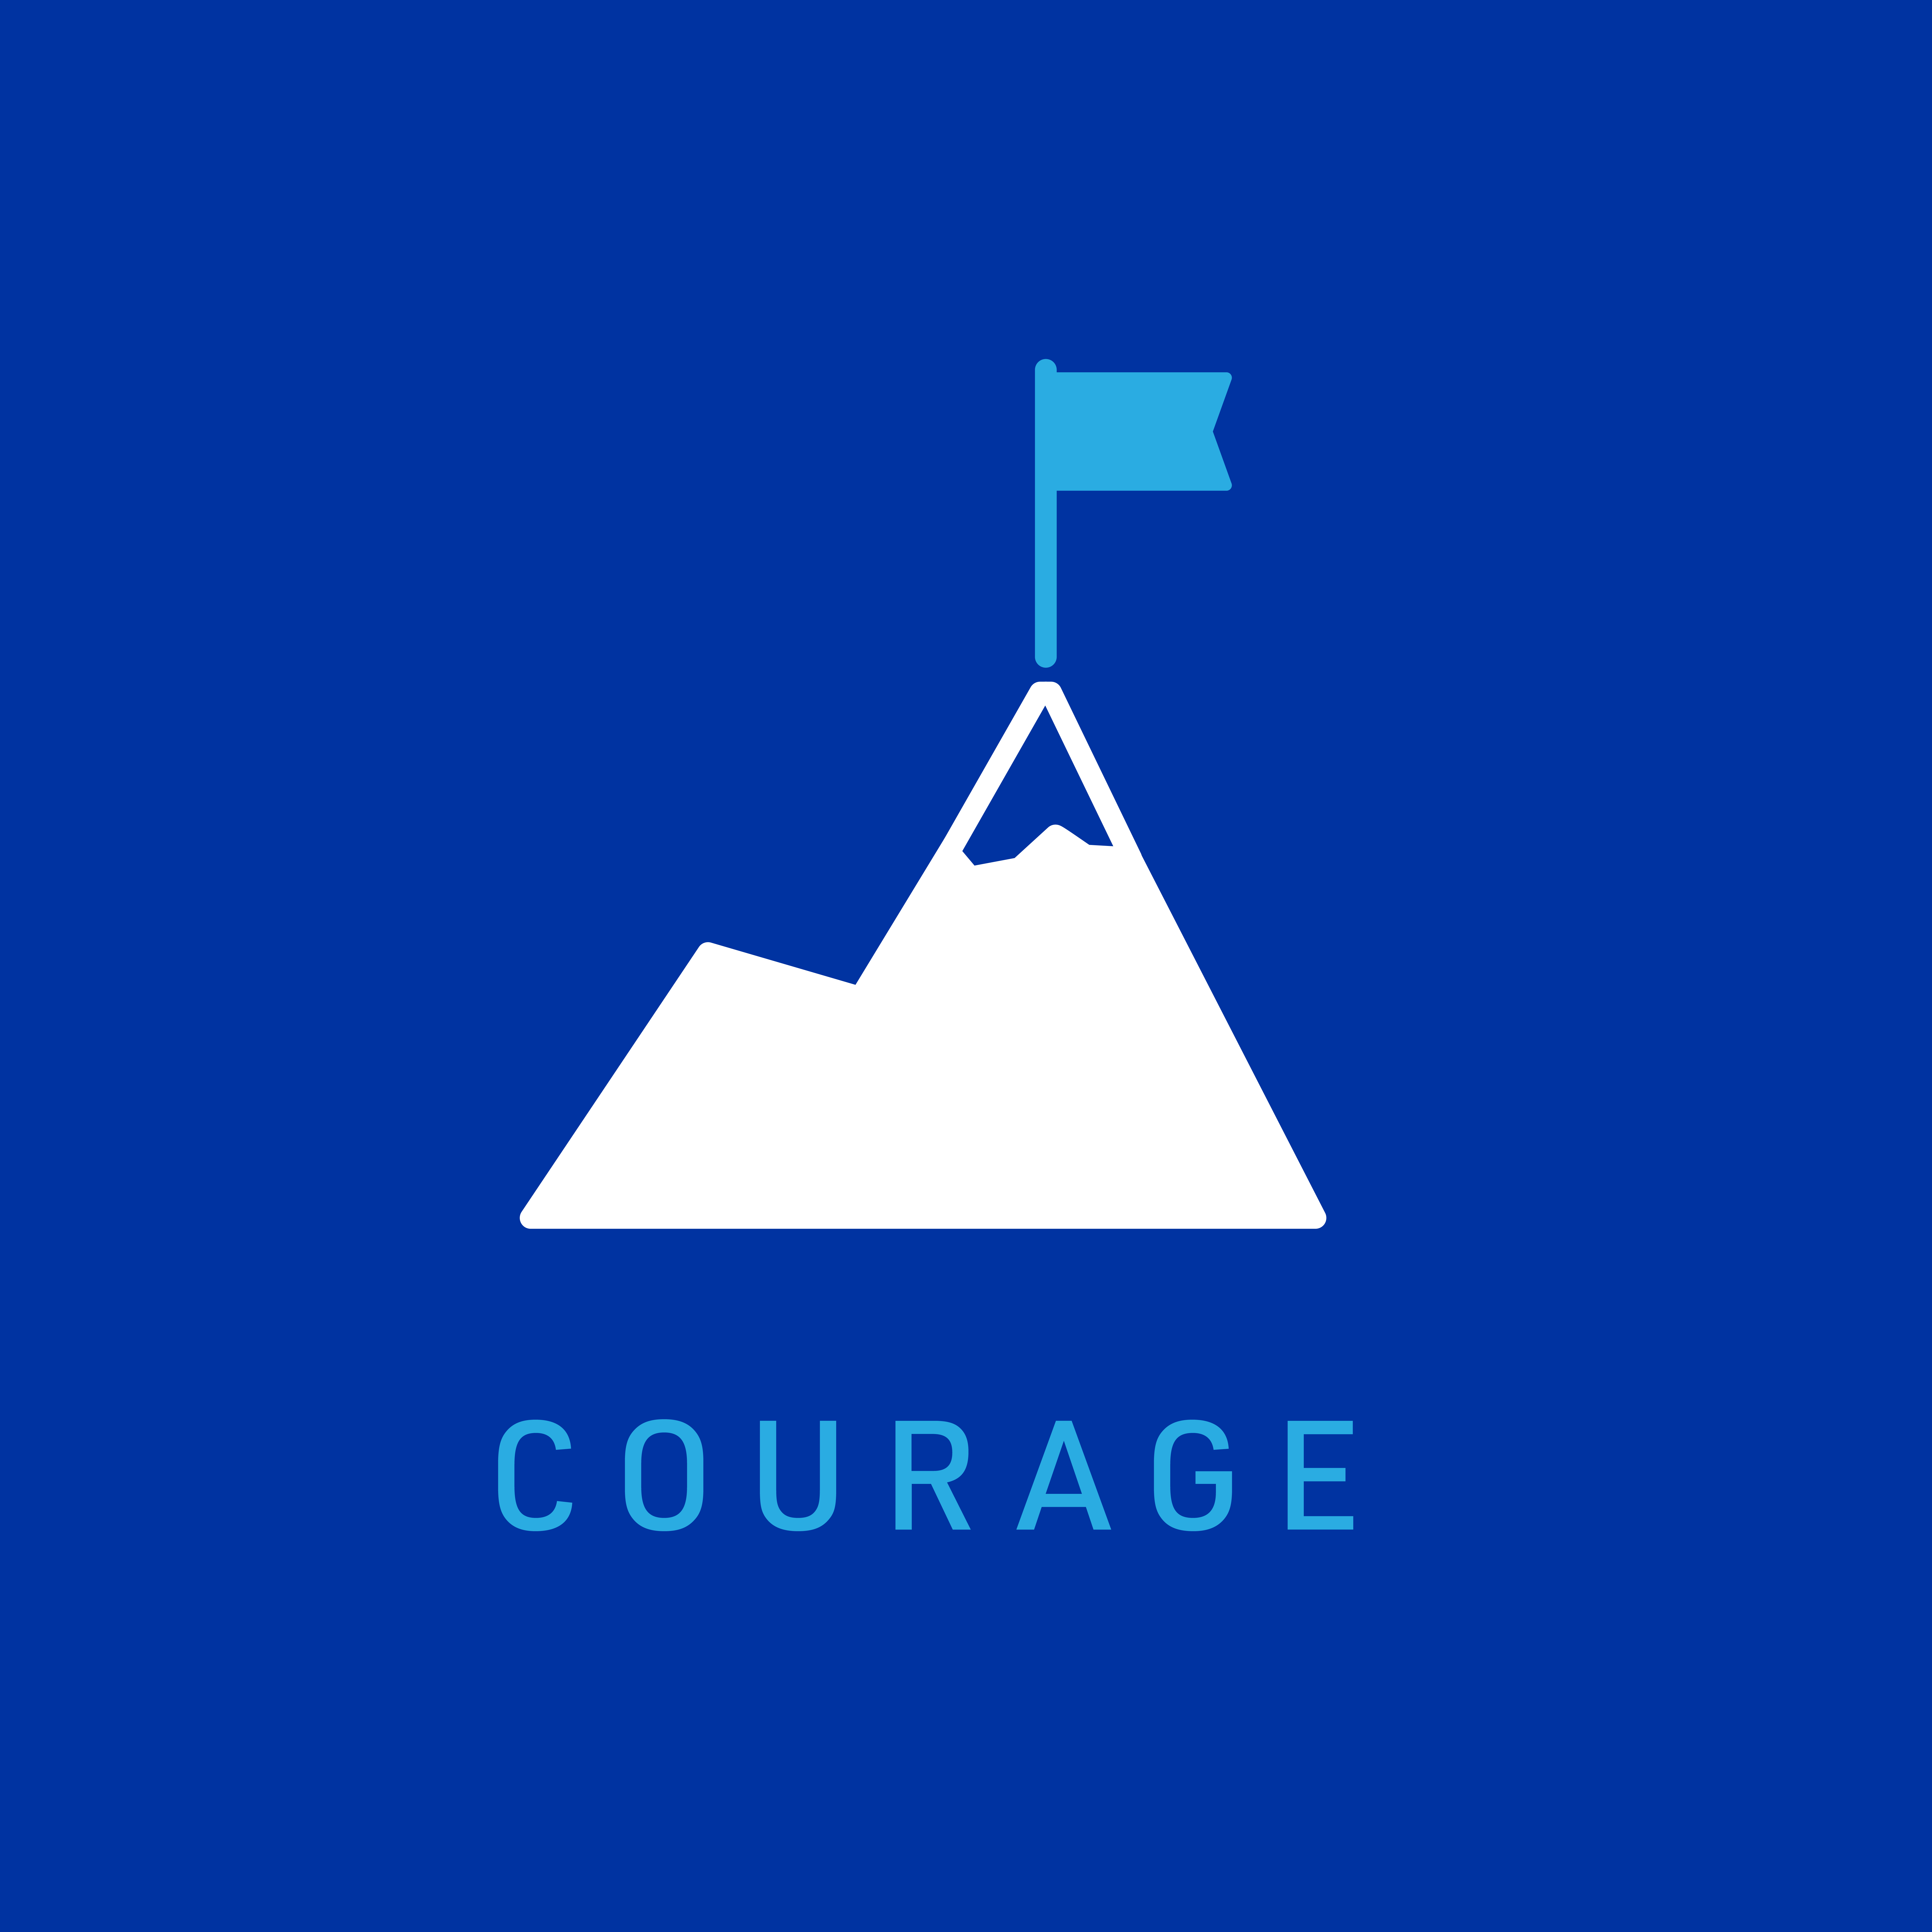 MiTek's guiding principle of courage - A square graphic of a mountain ridgeline with a flag planted on the uppermost peak